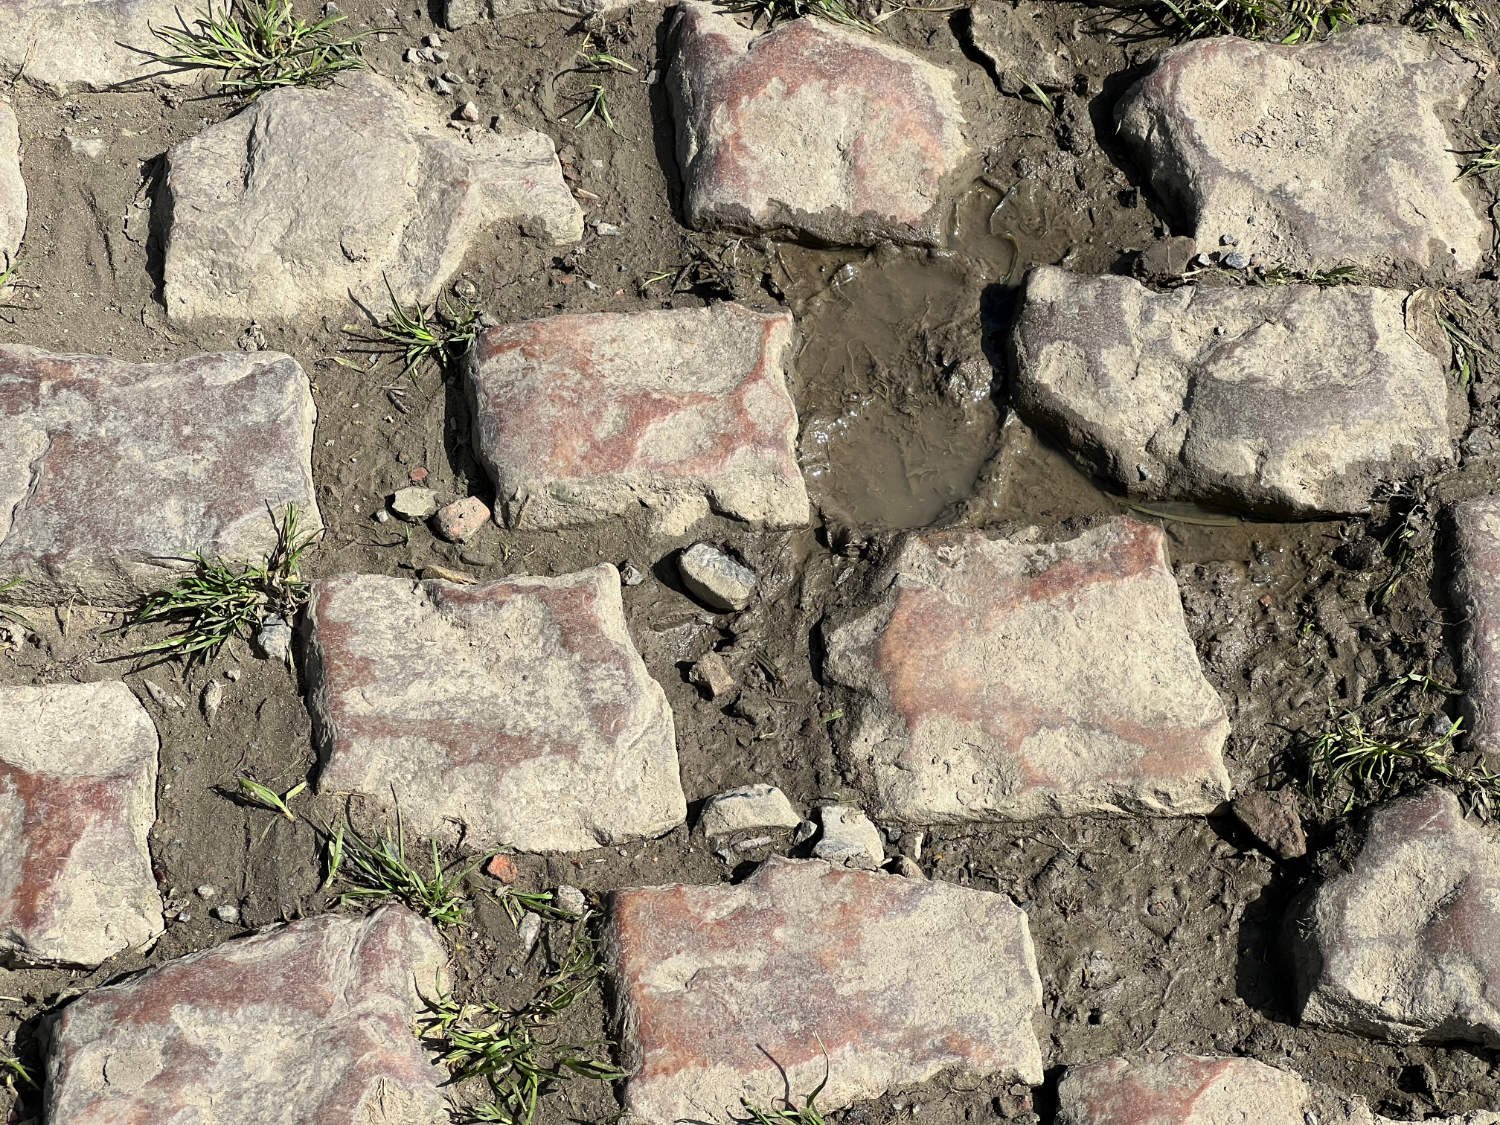 The 'cobbles' (properly called sets) of Roubaix